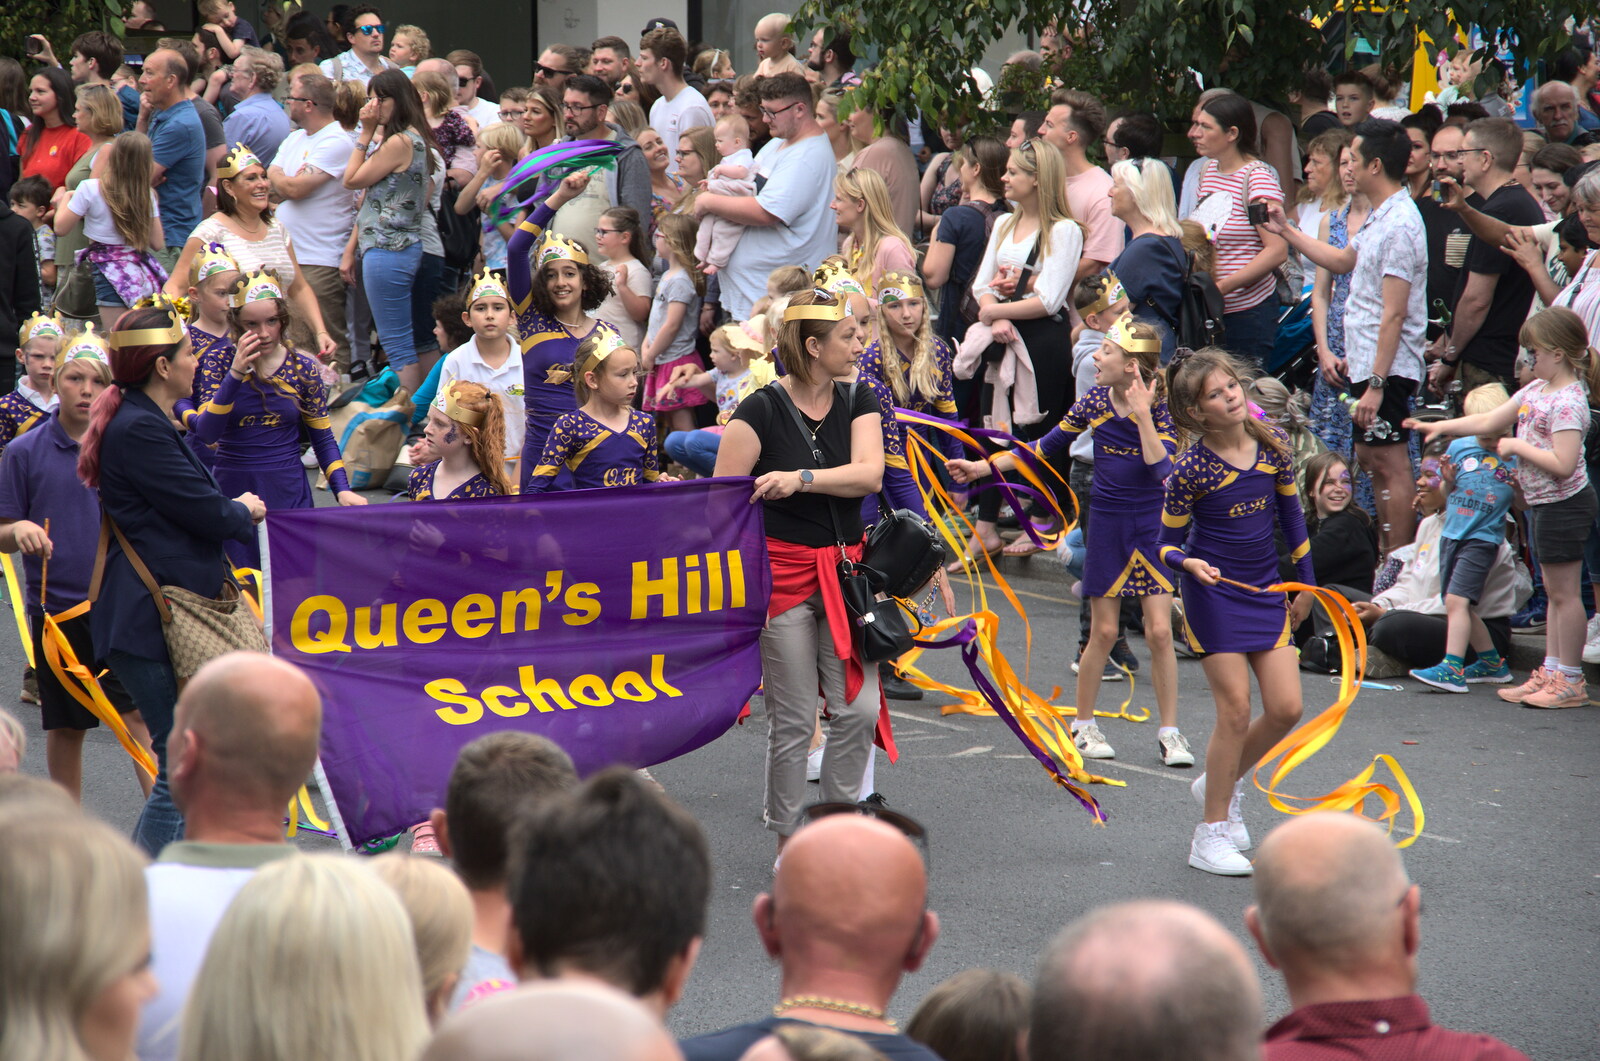 Another school dancing group from The Lord Mayor's Procession, Norwich, Norfolk - 2nd July 2022